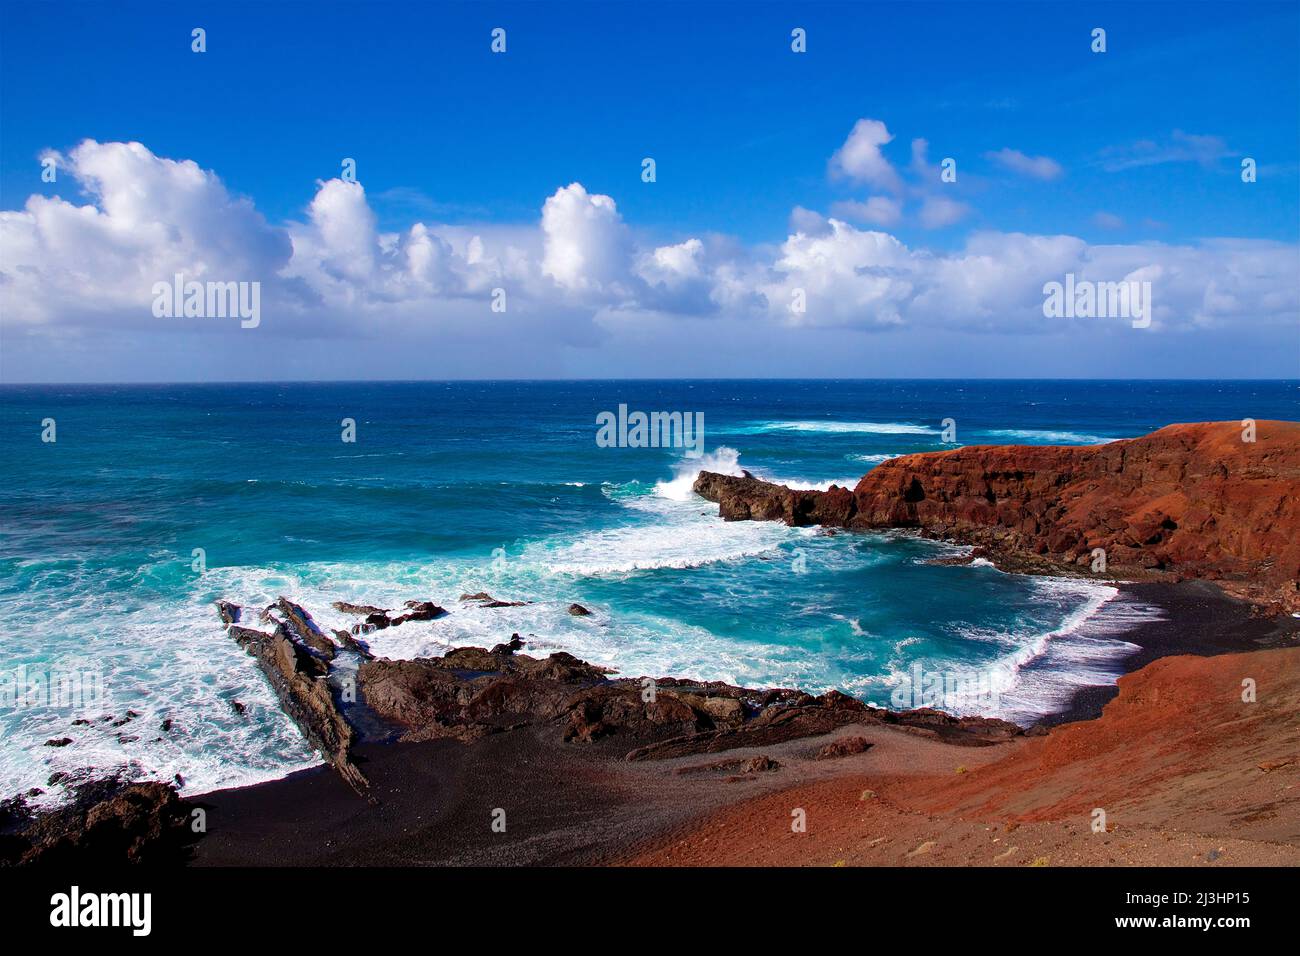 Canary Islands, Lanzarote, volcanic island, west coast, crater lake, Charco de los Clicos, lava rocks red, volcanic lake green, sky blue, clouds white, surf waves, sea blue, foaming spray Stock Photo